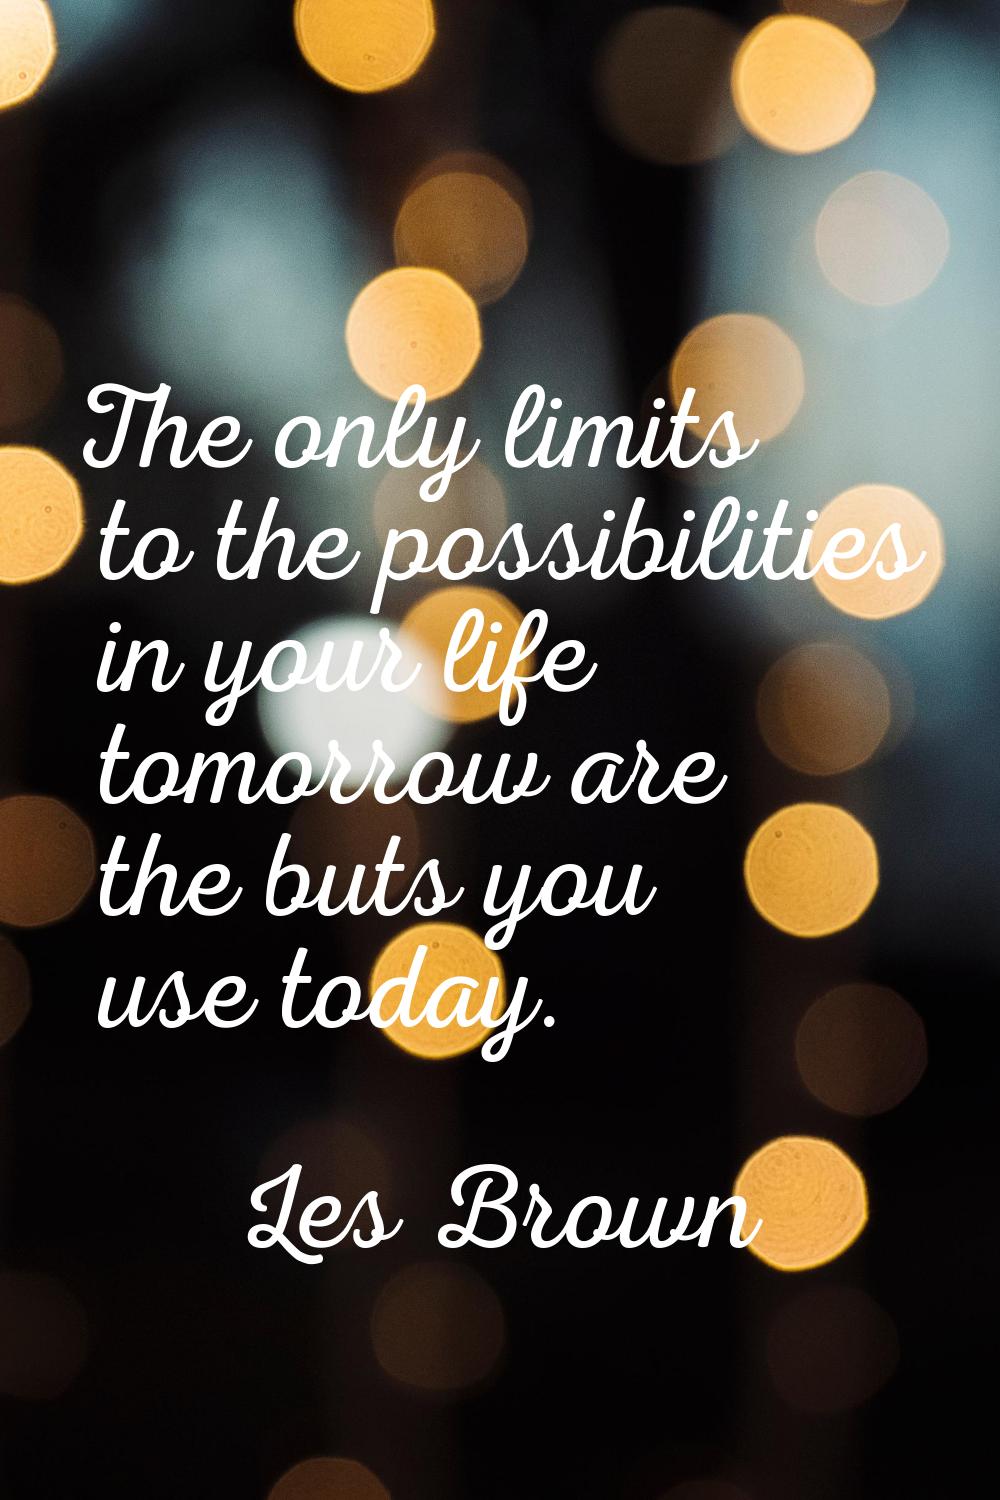 The only limits to the possibilities in your life tomorrow are the buts you use today.